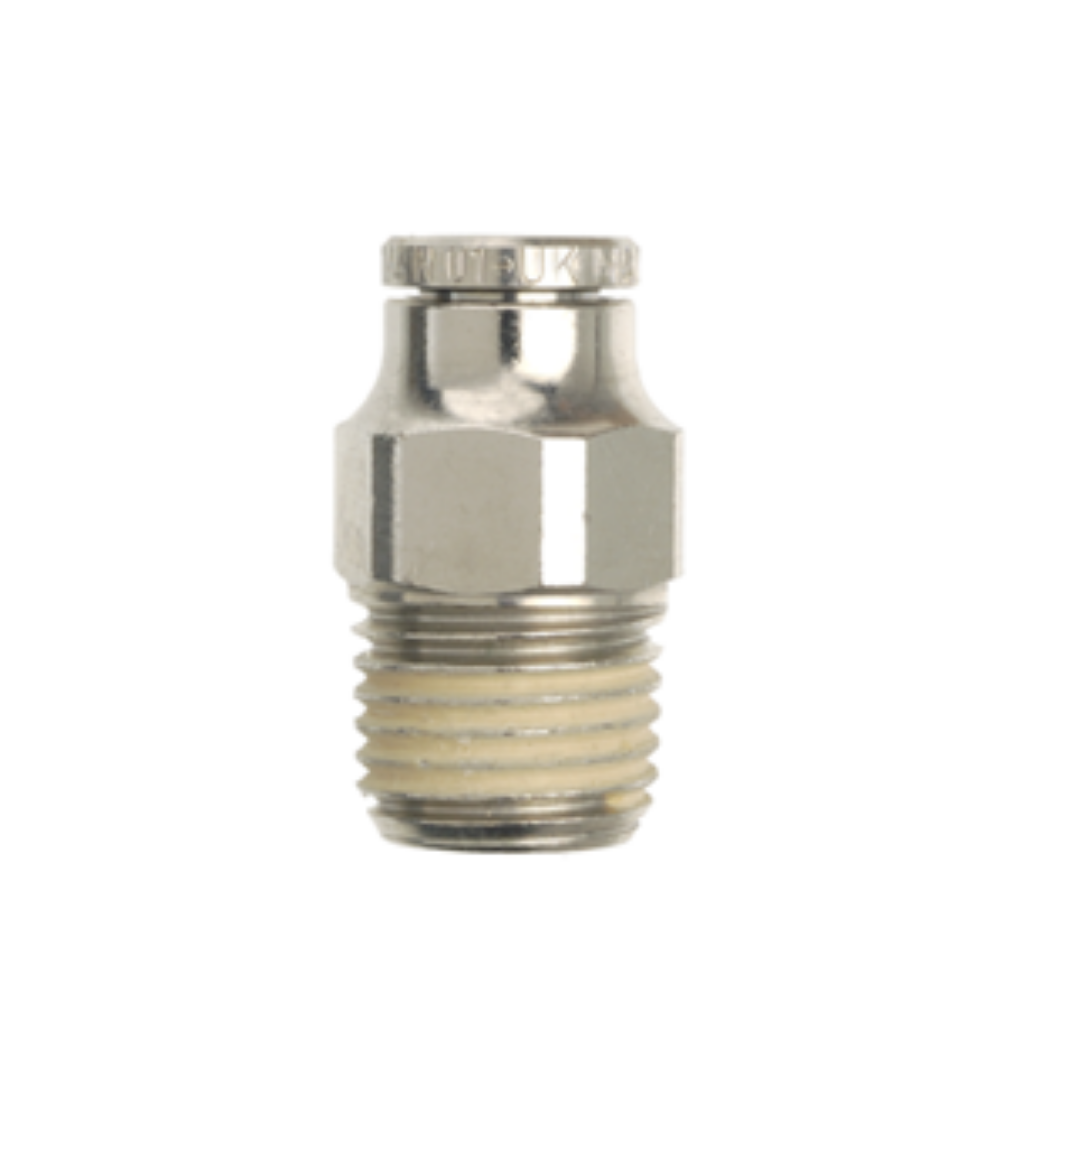 Picture of QFM3NP 6mmx1/8 MI BSPT Nickel Plated Adaptor